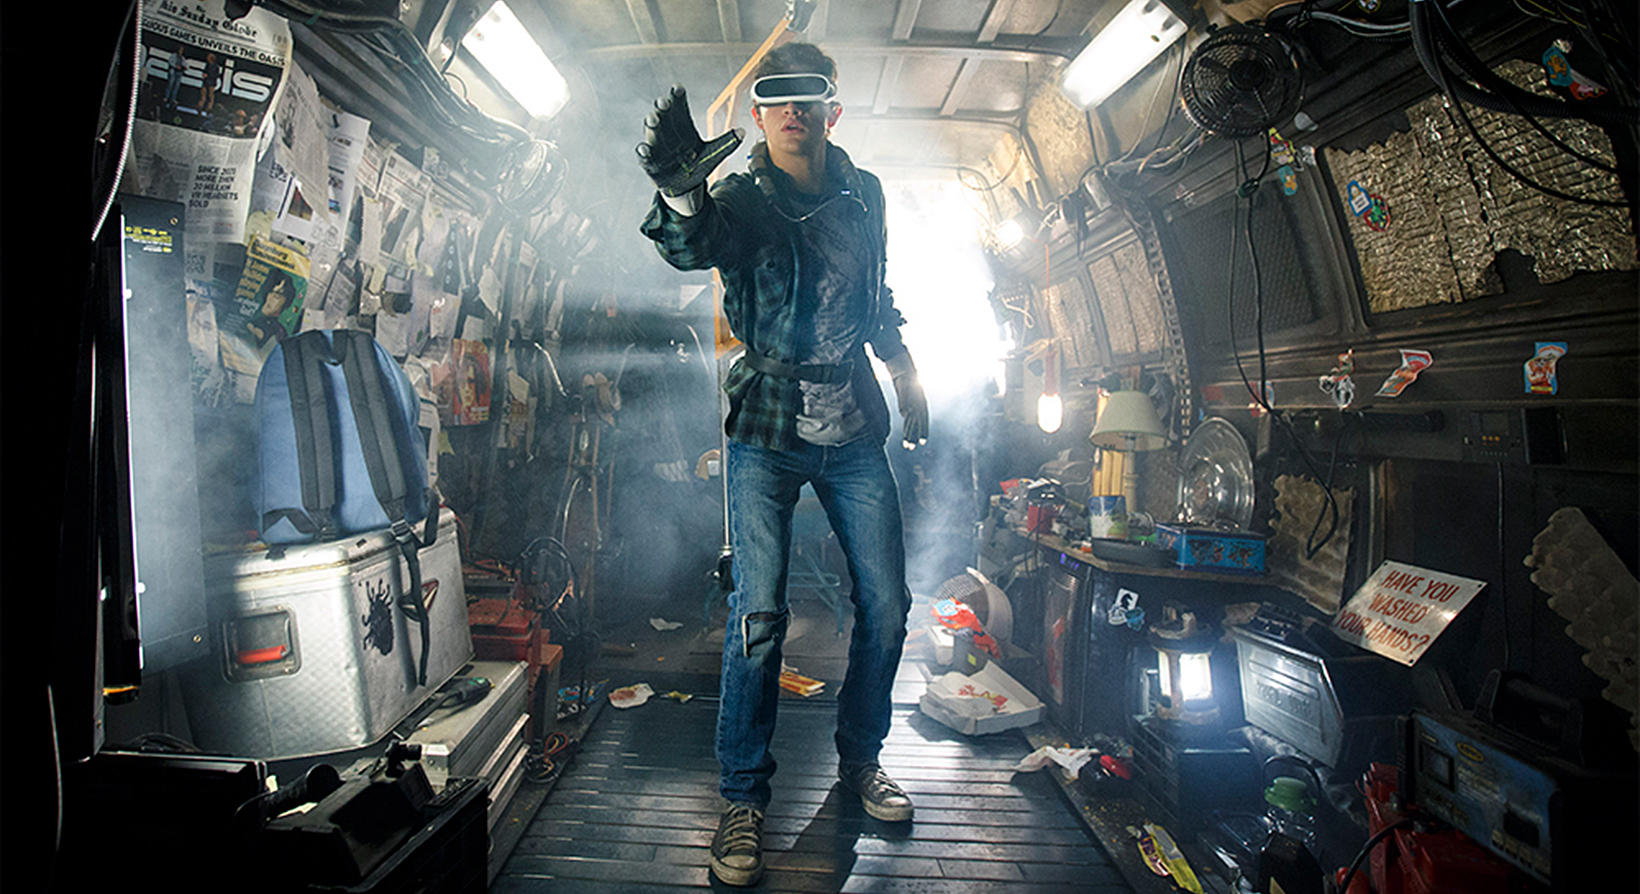 A scene from the movie, Ready Player One